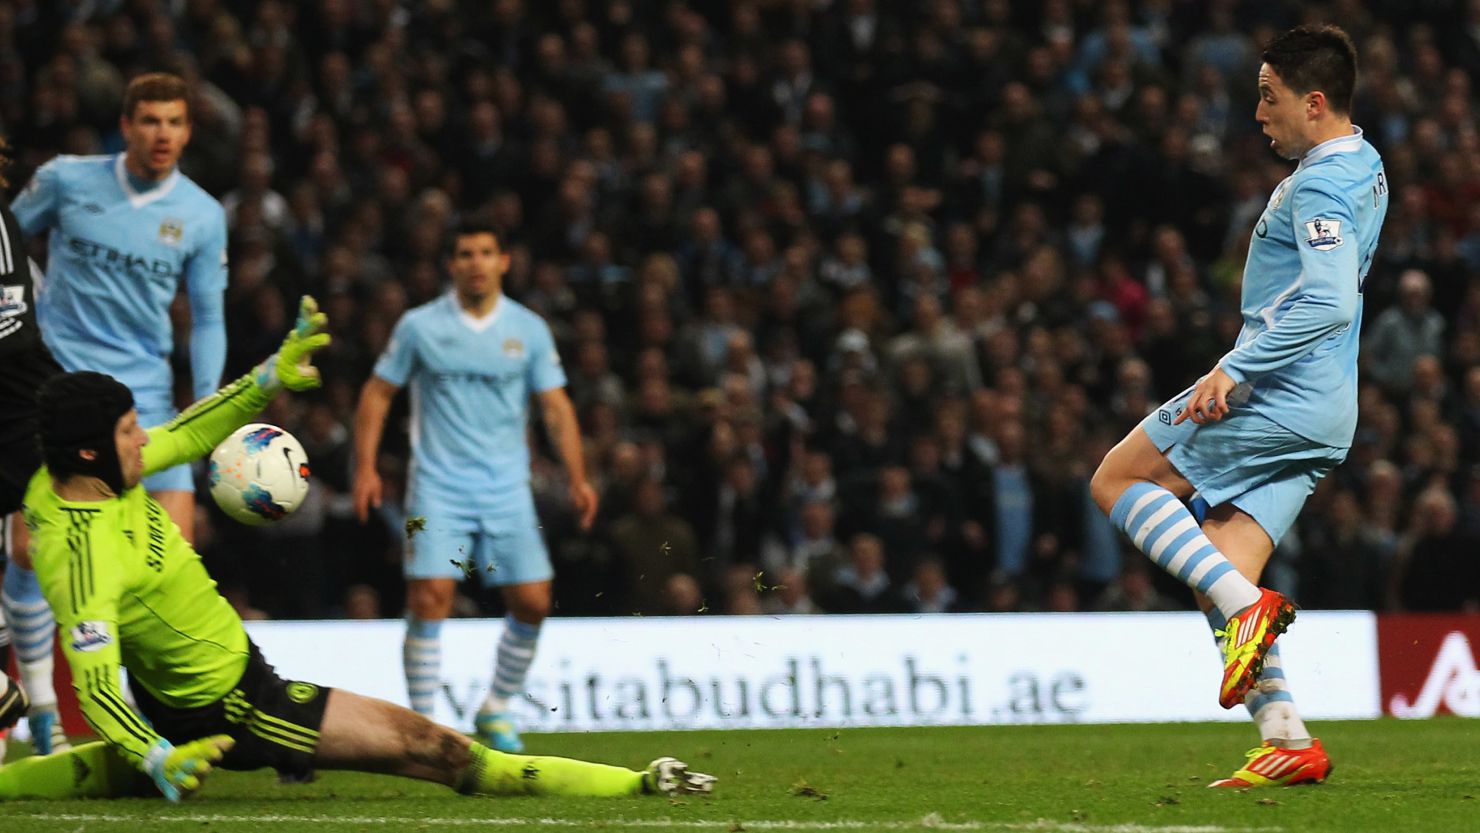 Samir Nasri lifts the ball over Chelsea keeper Petr Cech to seal a dramatic win for Manchester City